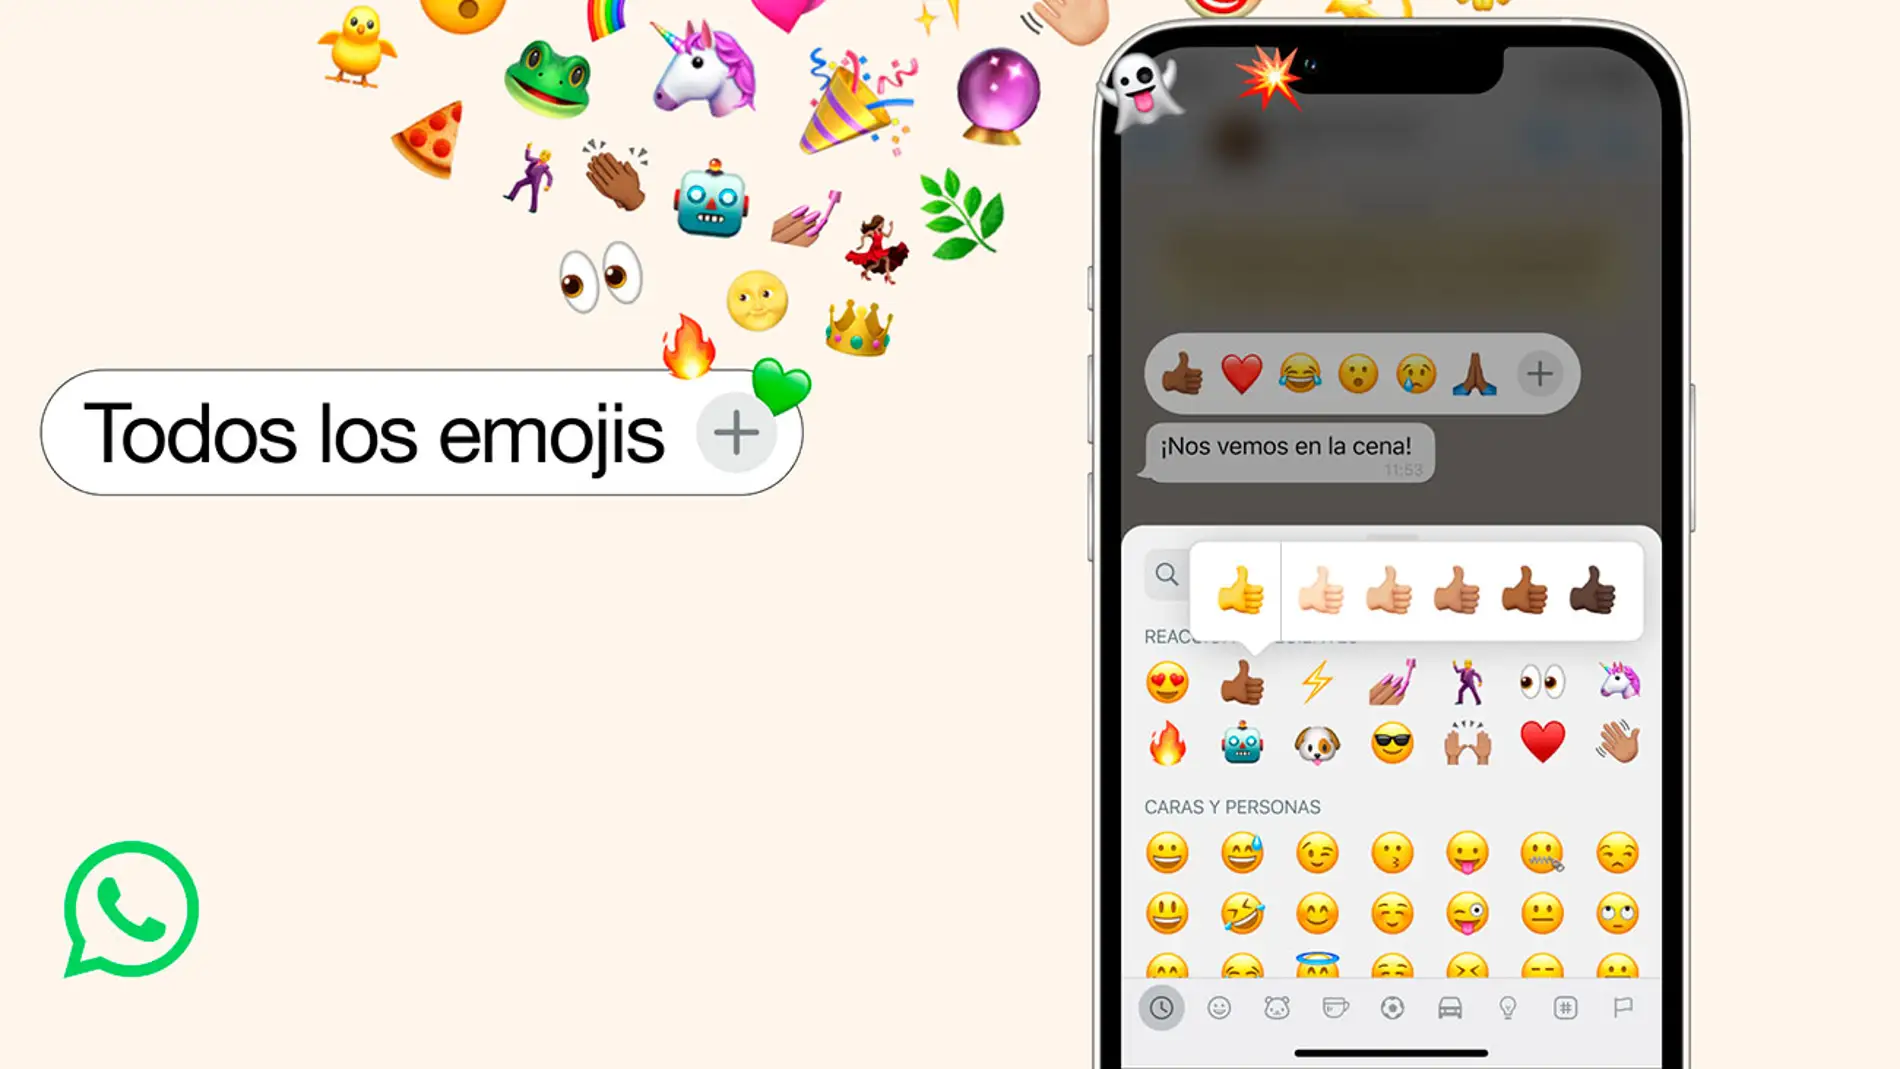 You can react with any emoji to messages on WhatsApp (photo: WhatsApp)